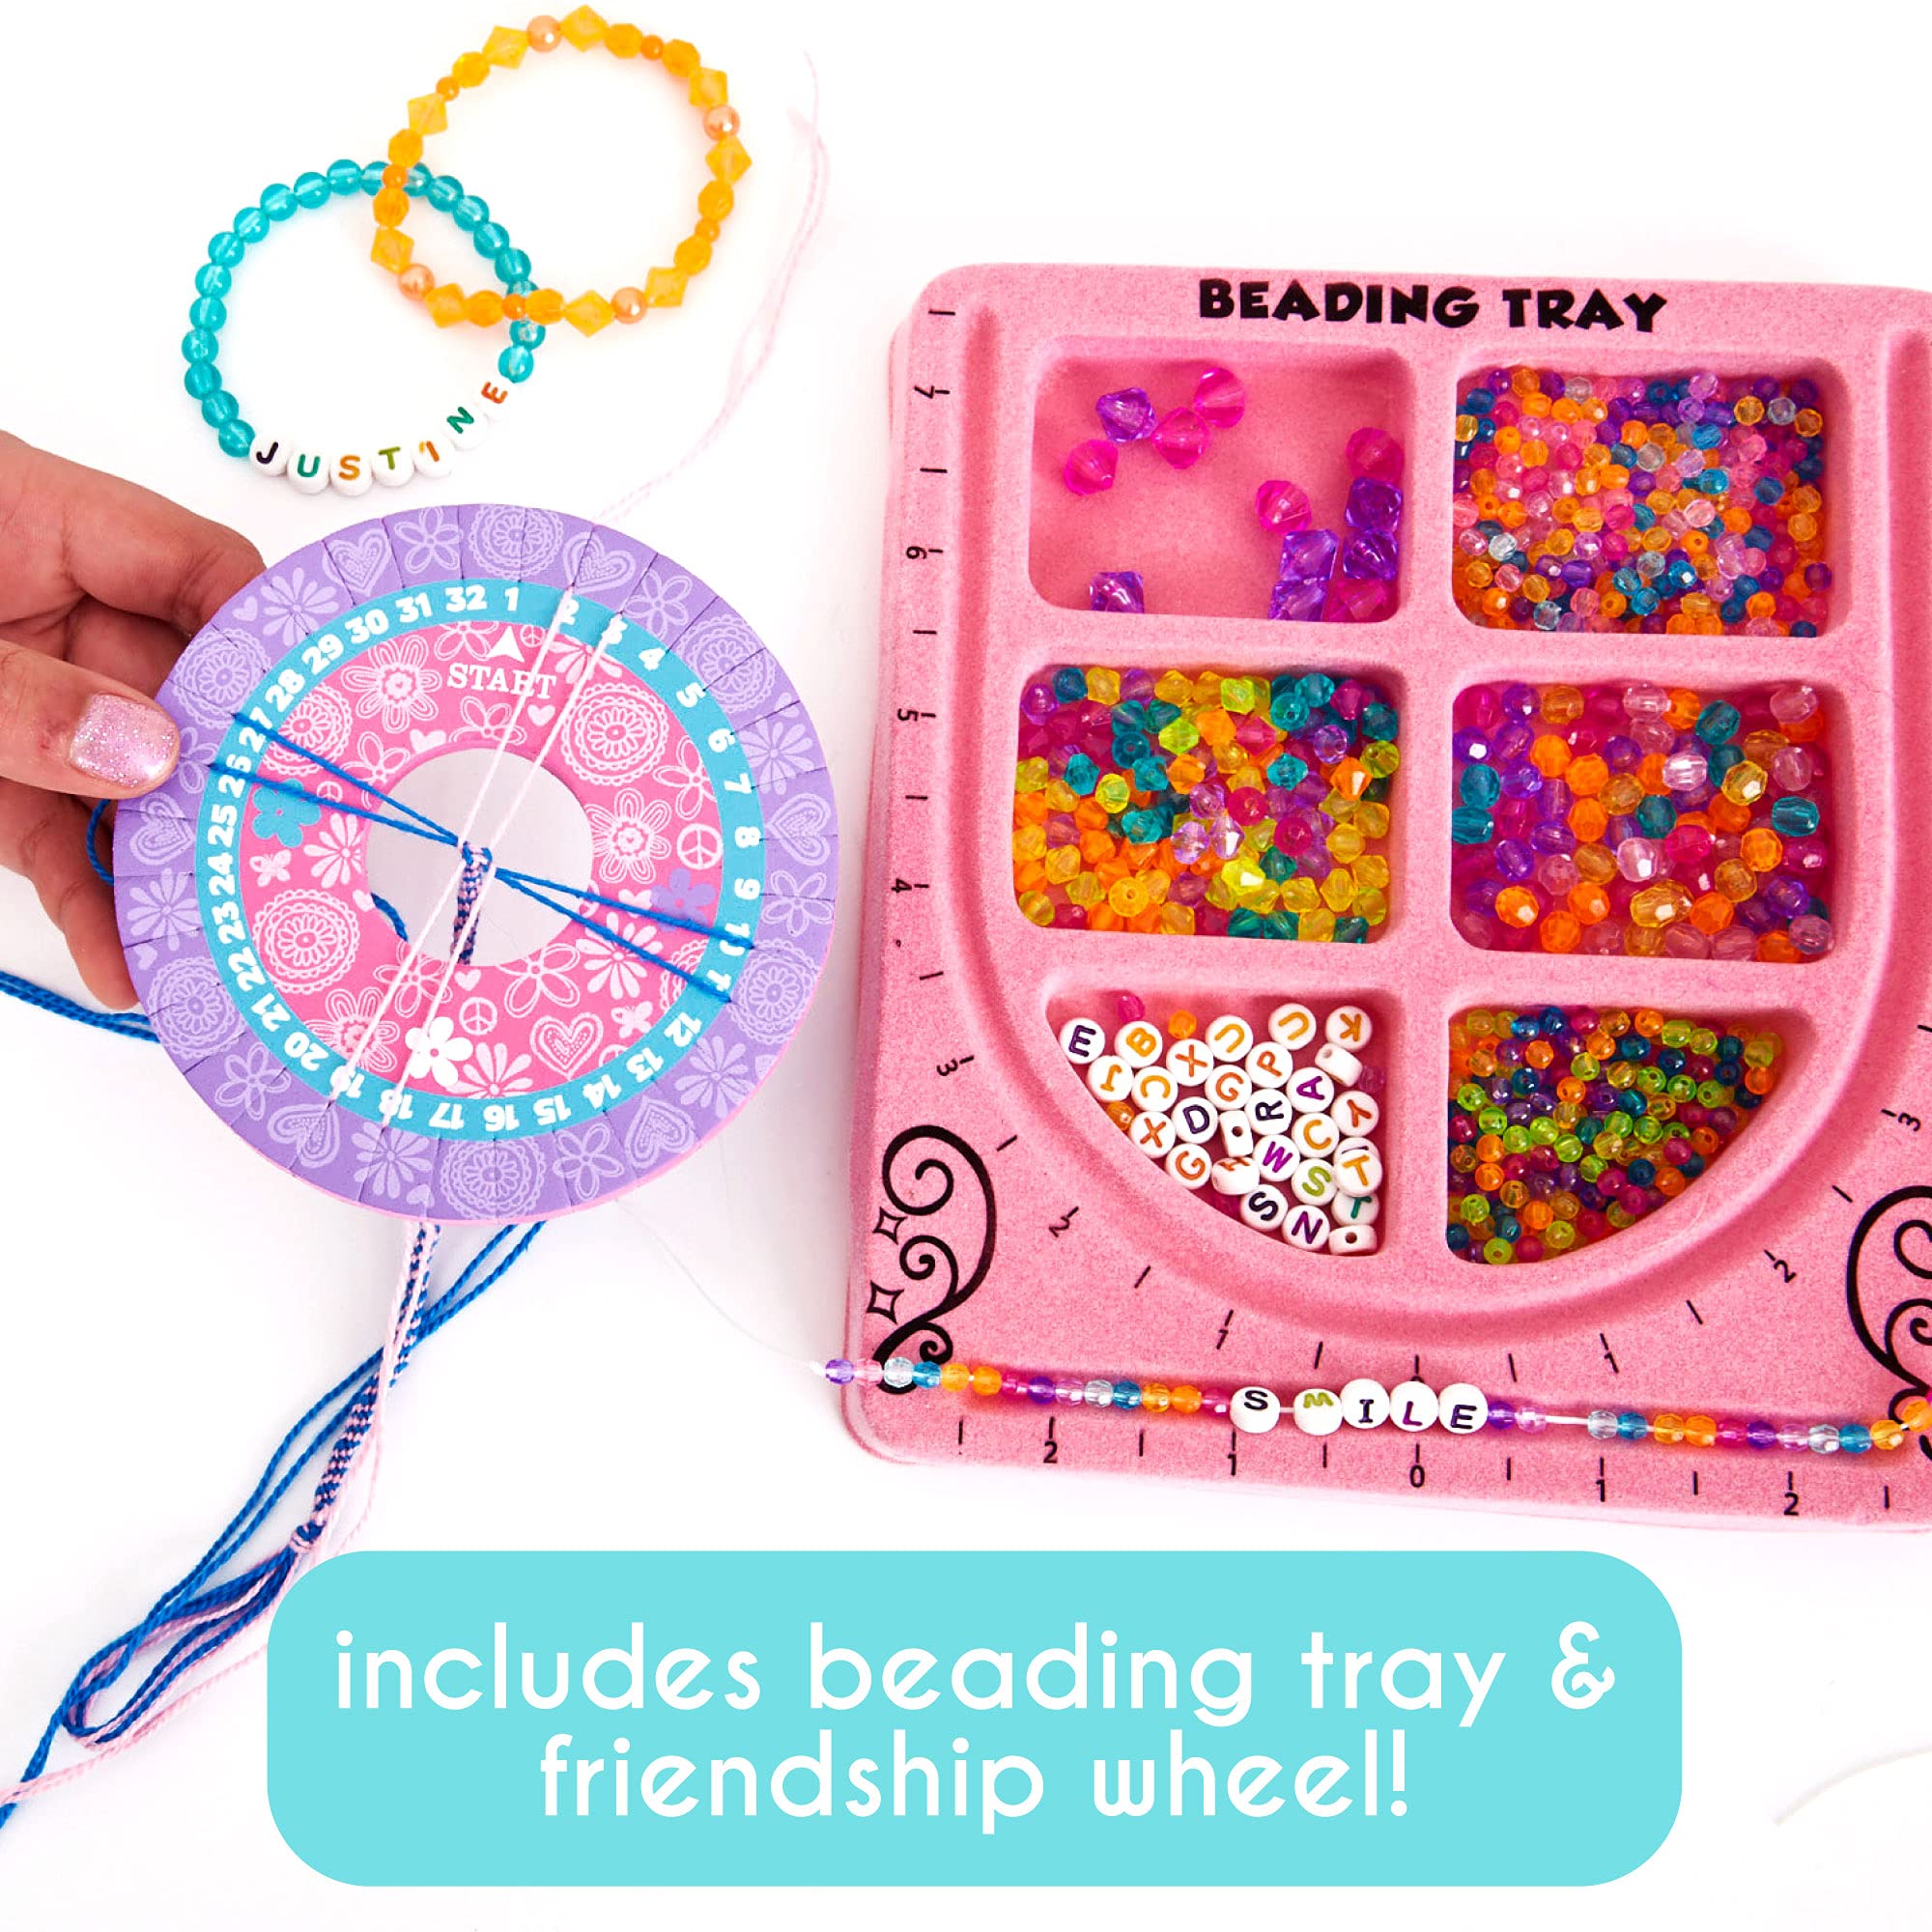 Just My Style My Very Own Jewelry Studio, Personalized Bracelet Making Kit With 1700+ Beads, Bead Kit Great for On-The-Go, Travel DIY Custom Accessories for Ages 6, 7, 8, 9